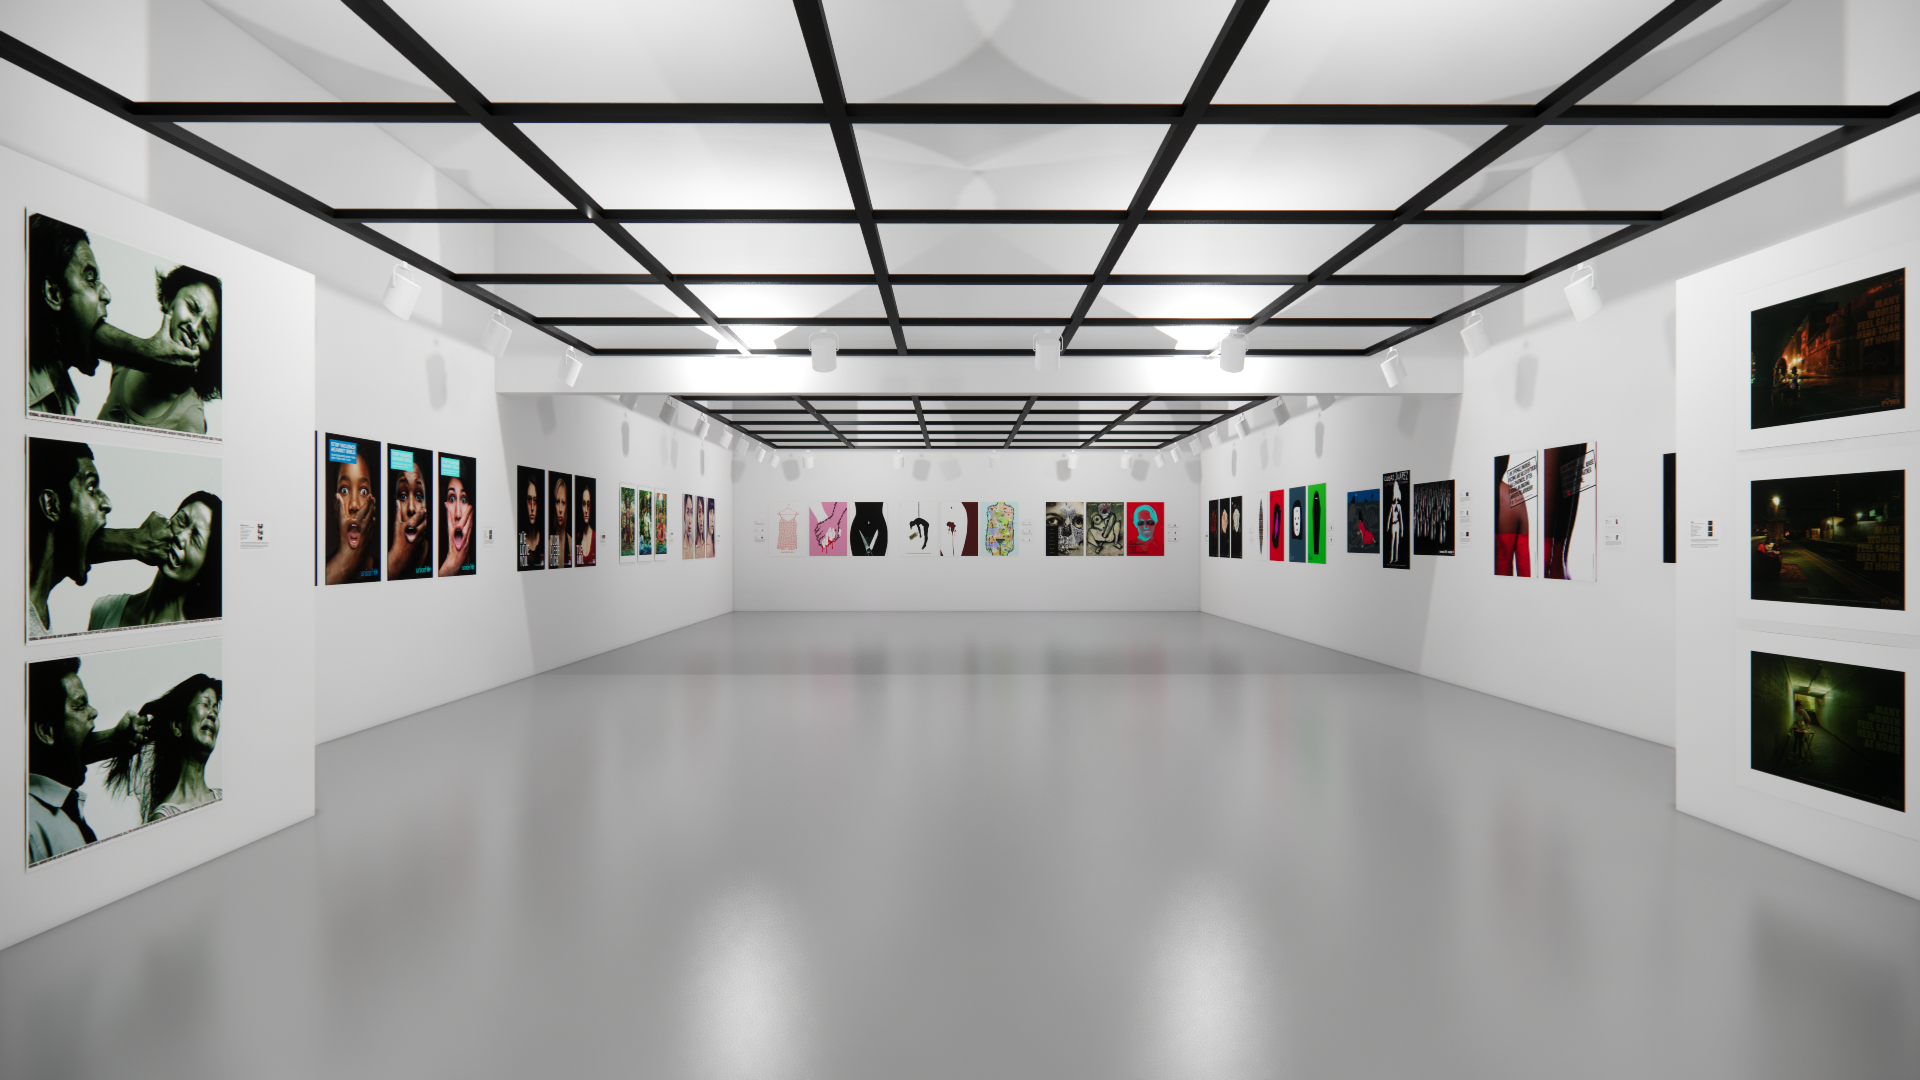 Installation View, Back of Gallery, Women's Rights are Human Rights Exhibition, Sept 15, 2021 to Dec 1, 2021